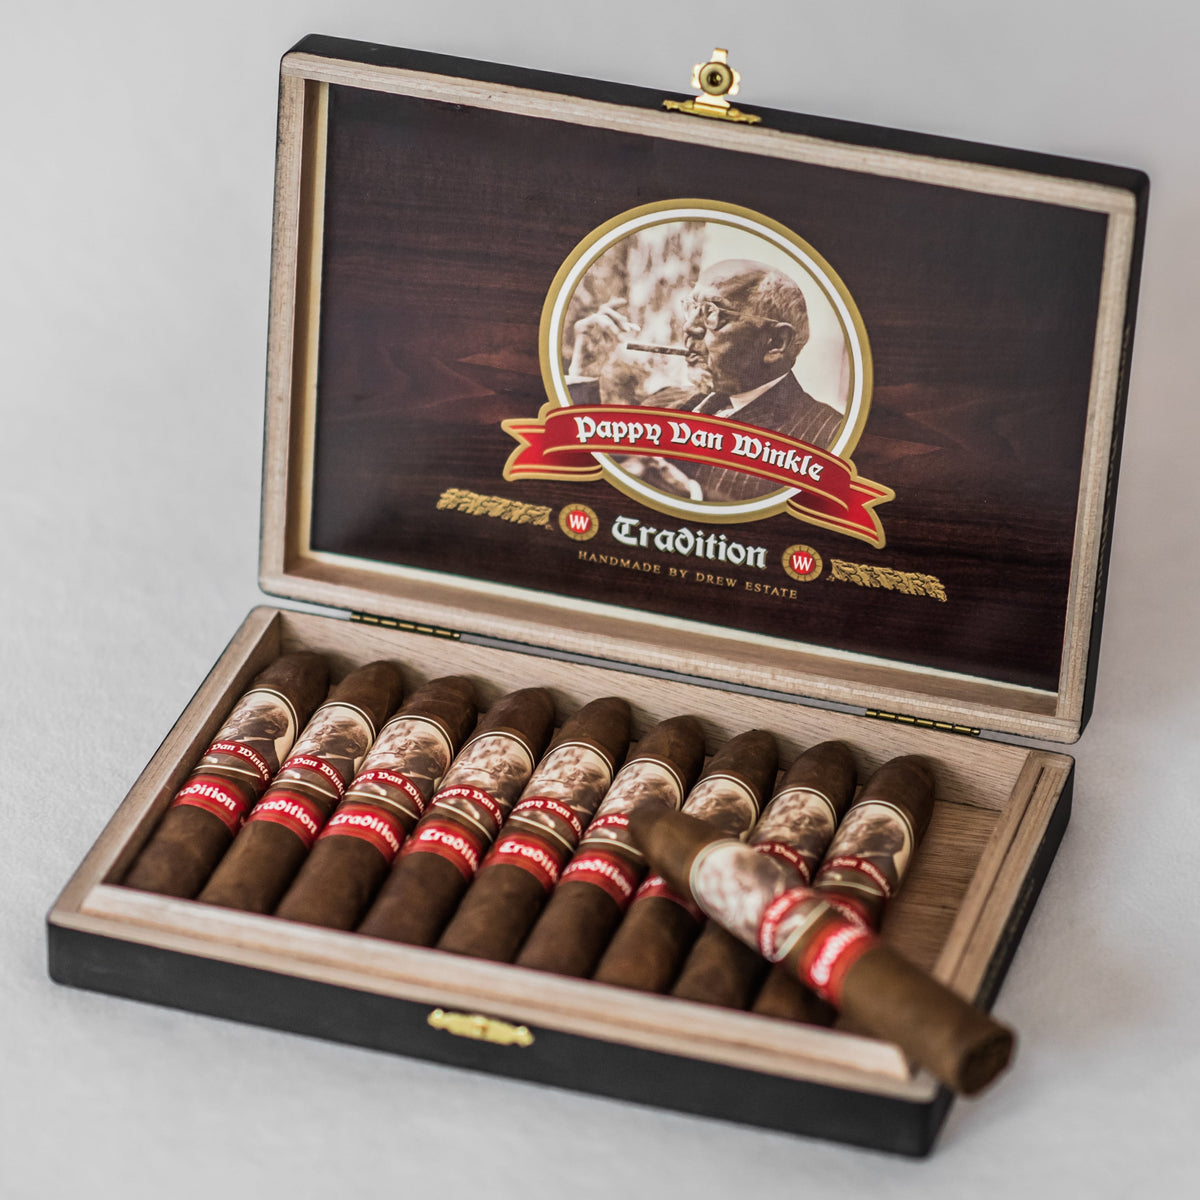 Pappy Van Winkle Tradition Cigars: Limited Edition Belicoso (Box of 10)